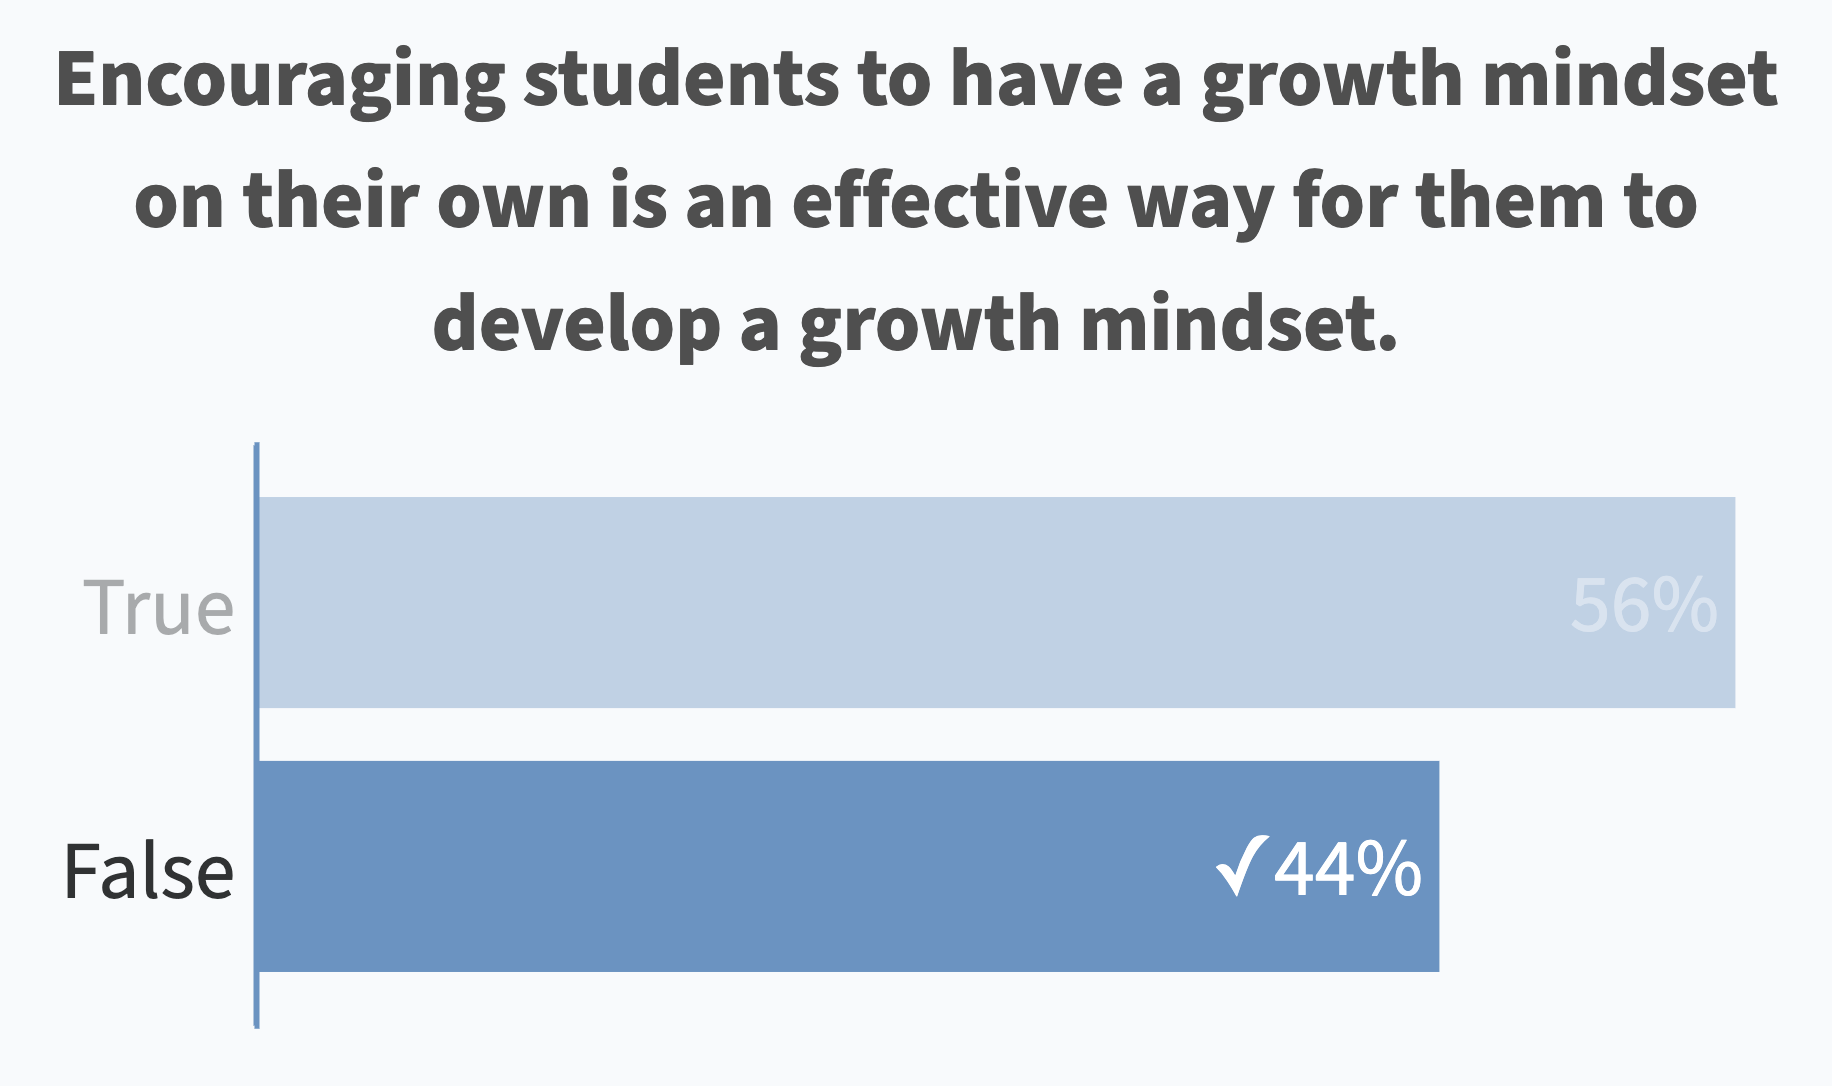 Encouraging students to have a growth mindset on their own is an effective way for them to develop a growth mindset. (False: 44% correct)